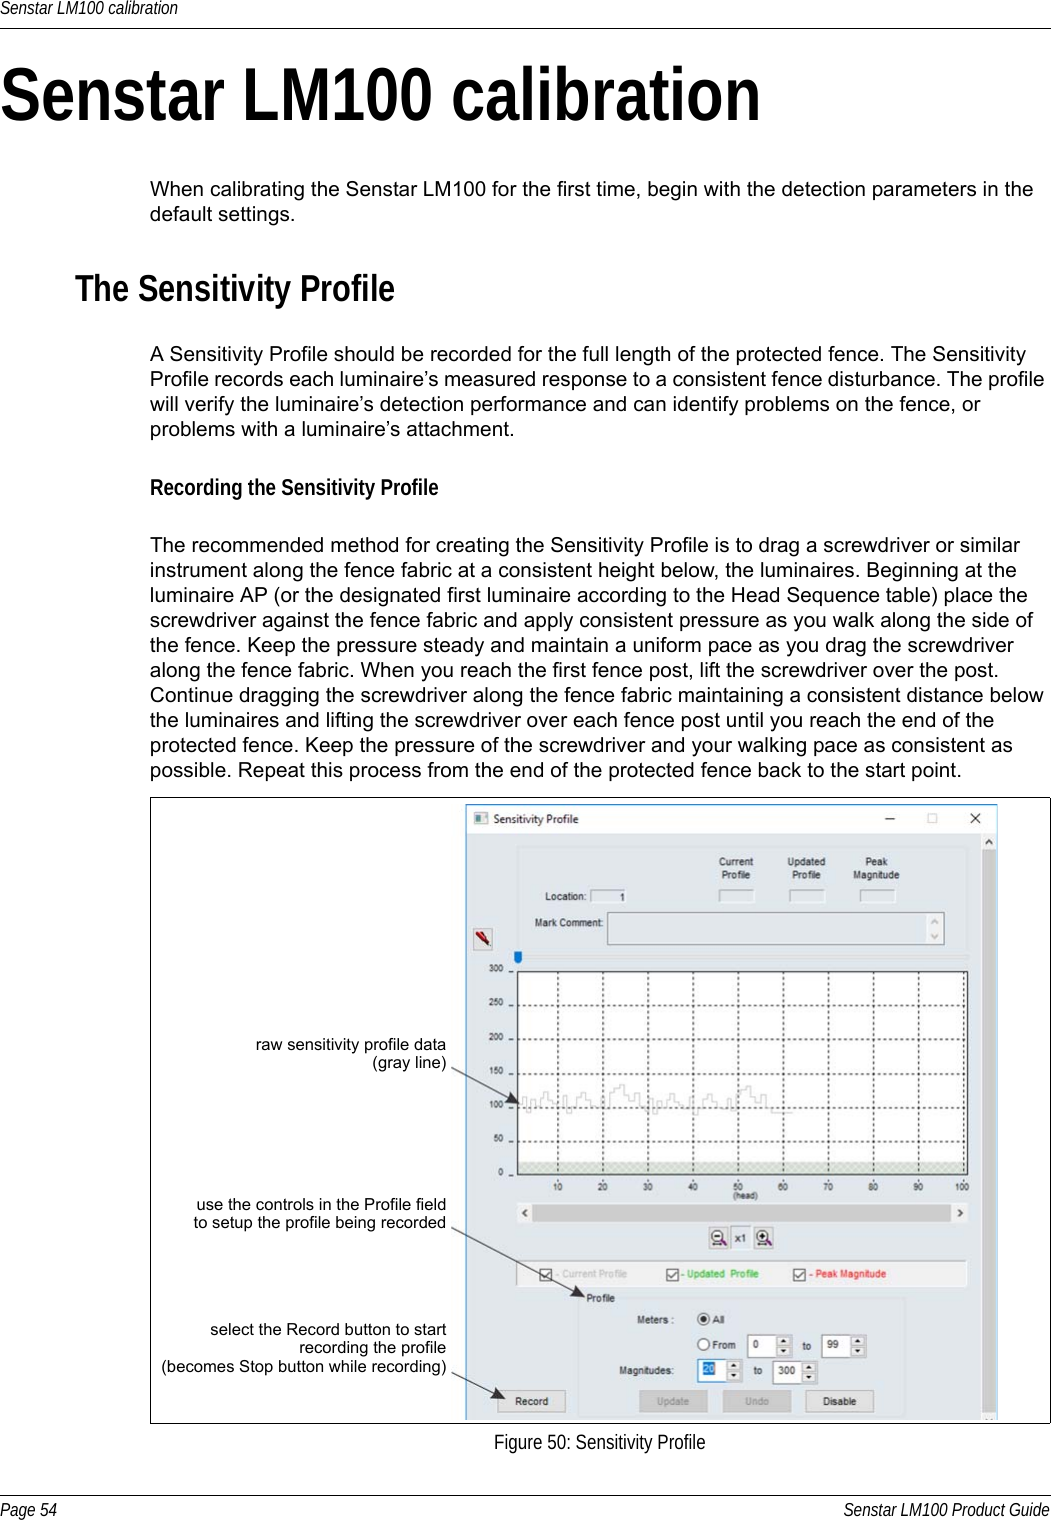 Senstar LM100 calibrationPage 54 Senstar LM100 Product GuideSenstar LM100 calibrationWhen calibrating the Senstar LM100 for the first time, begin with the detection parameters in the default settings.The Sensitivity ProfileA Sensitivity Profile should be recorded for the full length of the protected fence. The Sensitivity Profile records each luminaire’s measured response to a consistent fence disturbance. The profile will verify the luminaire’s detection performance and can identify problems on the fence, or problems with a luminaire’s attachment.Recording the Sensitivity ProfileThe recommended method for creating the Sensitivity Profile is to drag a screwdriver or similar instrument along the fence fabric at a consistent height below, the luminaires. Beginning at the luminaire AP (or the designated first luminaire according to the Head Sequence table) place the screwdriver against the fence fabric and apply consistent pressure as you walk along the side of the fence. Keep the pressure steady and maintain a uniform pace as you drag the screwdriver along the fence fabric. When you reach the first fence post, lift the screwdriver over the post. Continue dragging the screwdriver along the fence fabric maintaining a consistent distance below the luminaires and lifting the screwdriver over each fence post until you reach the end of the protected fence. Keep the pressure of the screwdriver and your walking pace as consistent as possible. Repeat this process from the end of the protected fence back to the start point.   Figure 50: Sensitivity Profileraw sensitivity profile data(gray line)use the controls in the Profile fieldselect the Record button to startrecording the profile(becomes Stop button while recording)to setup the profile being recorded